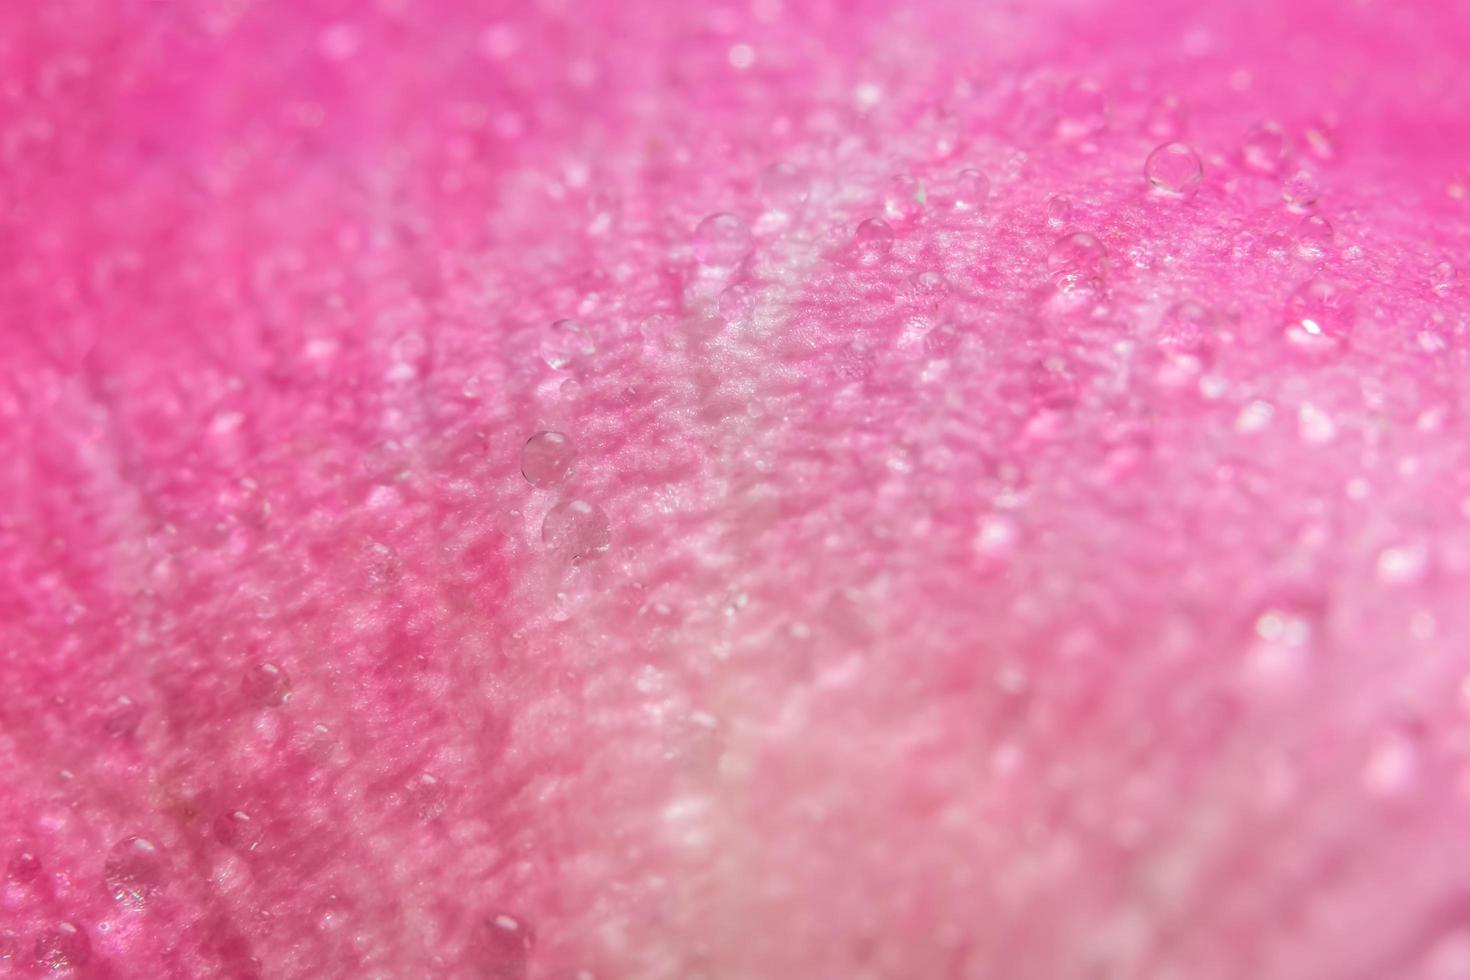 Water droplets on the petals of a pink rose photo